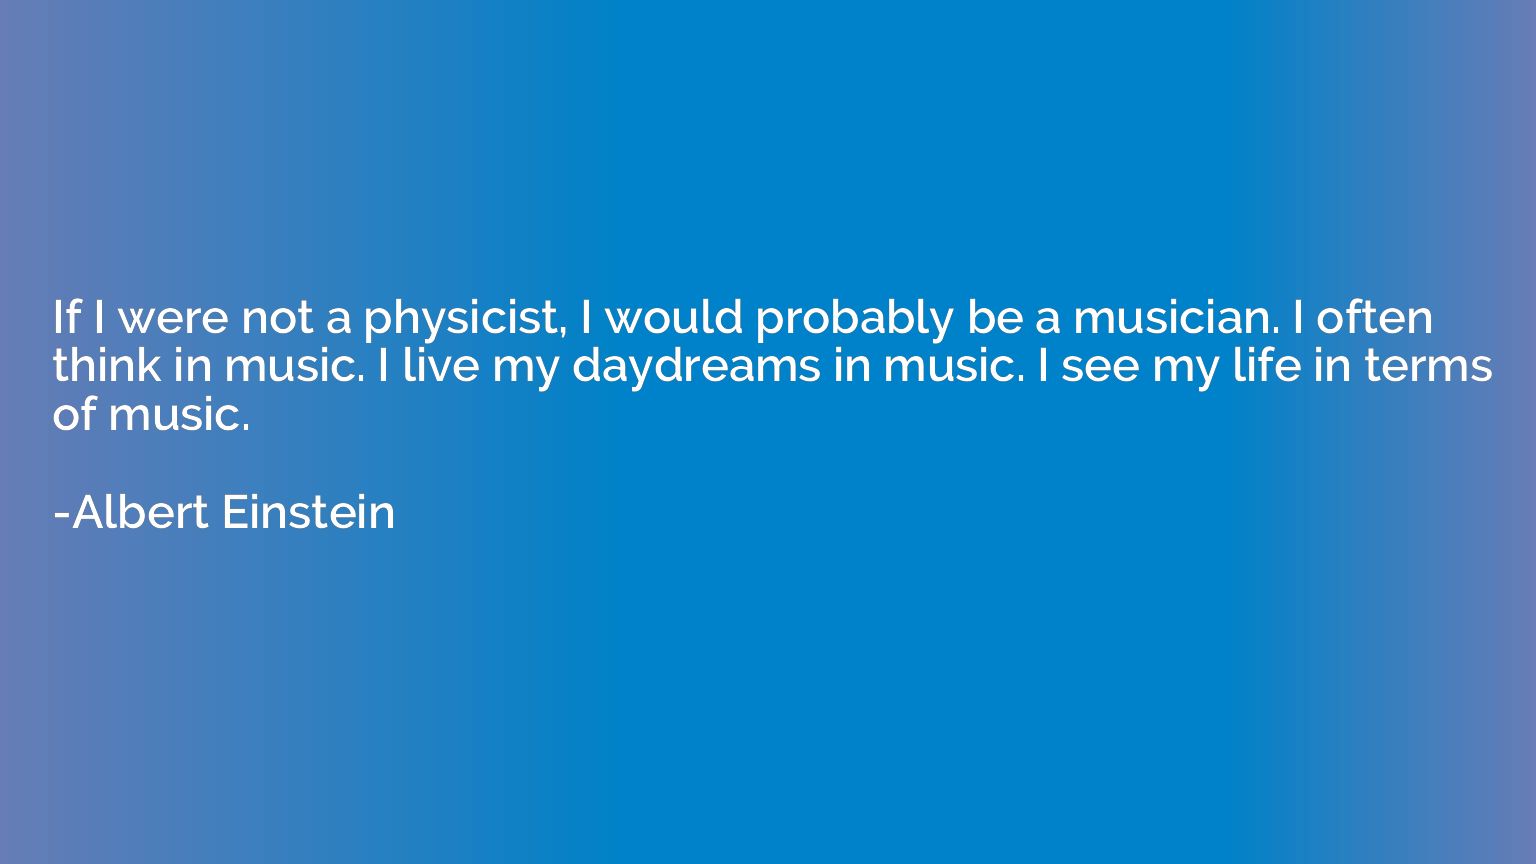 If I were not a physicist, I would probably be a musician. I